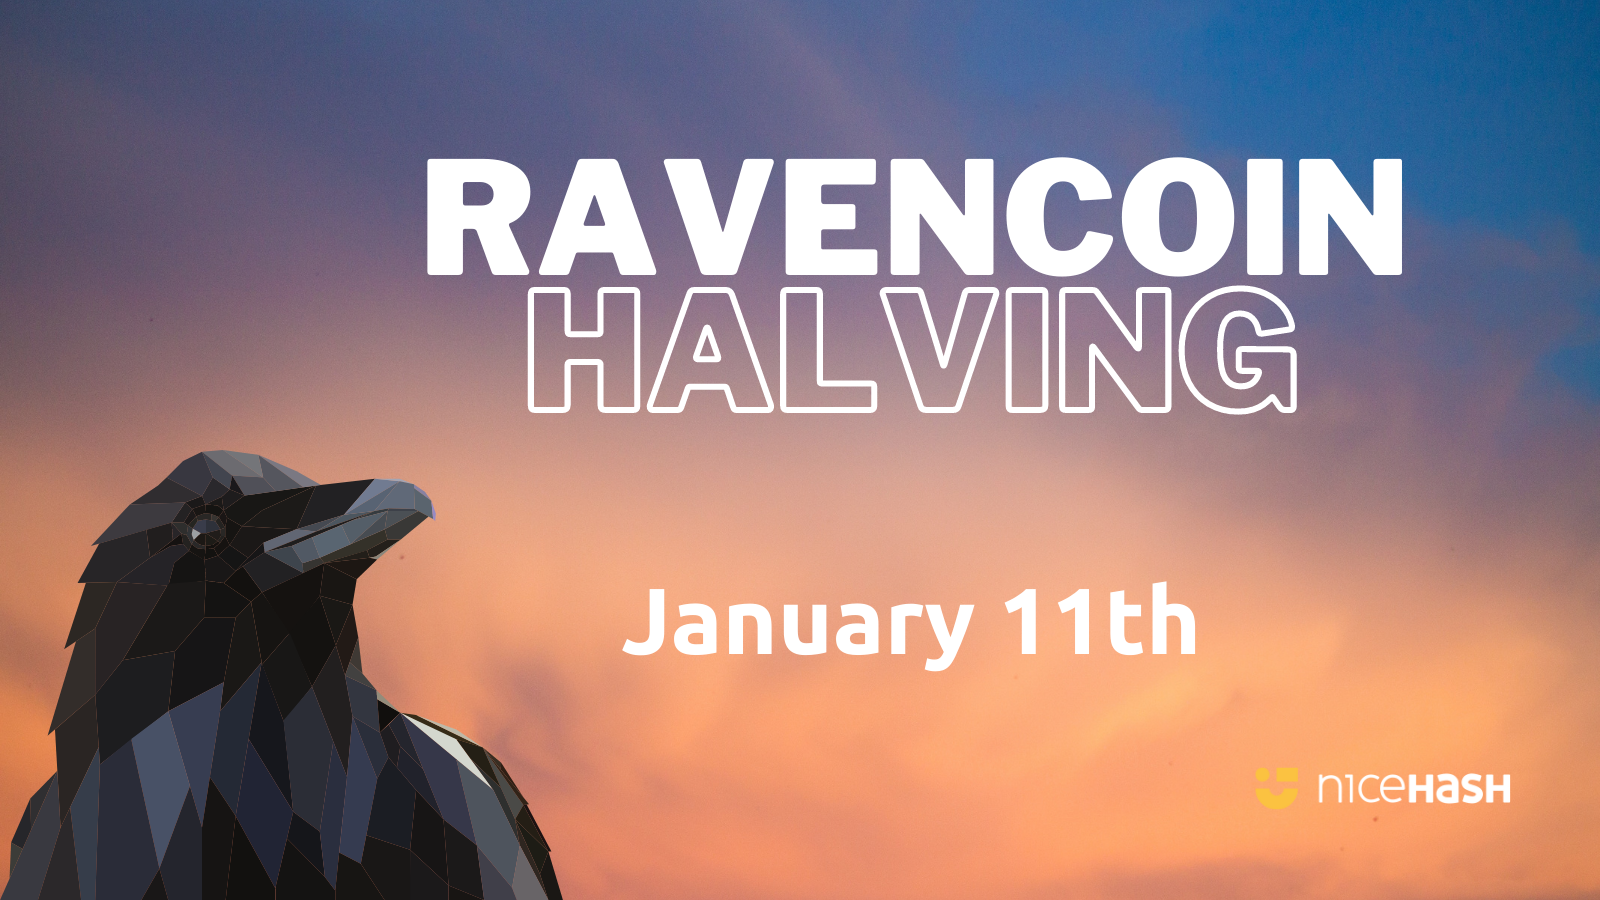 First ever halving event for Ravencoin set to take place tomorrow